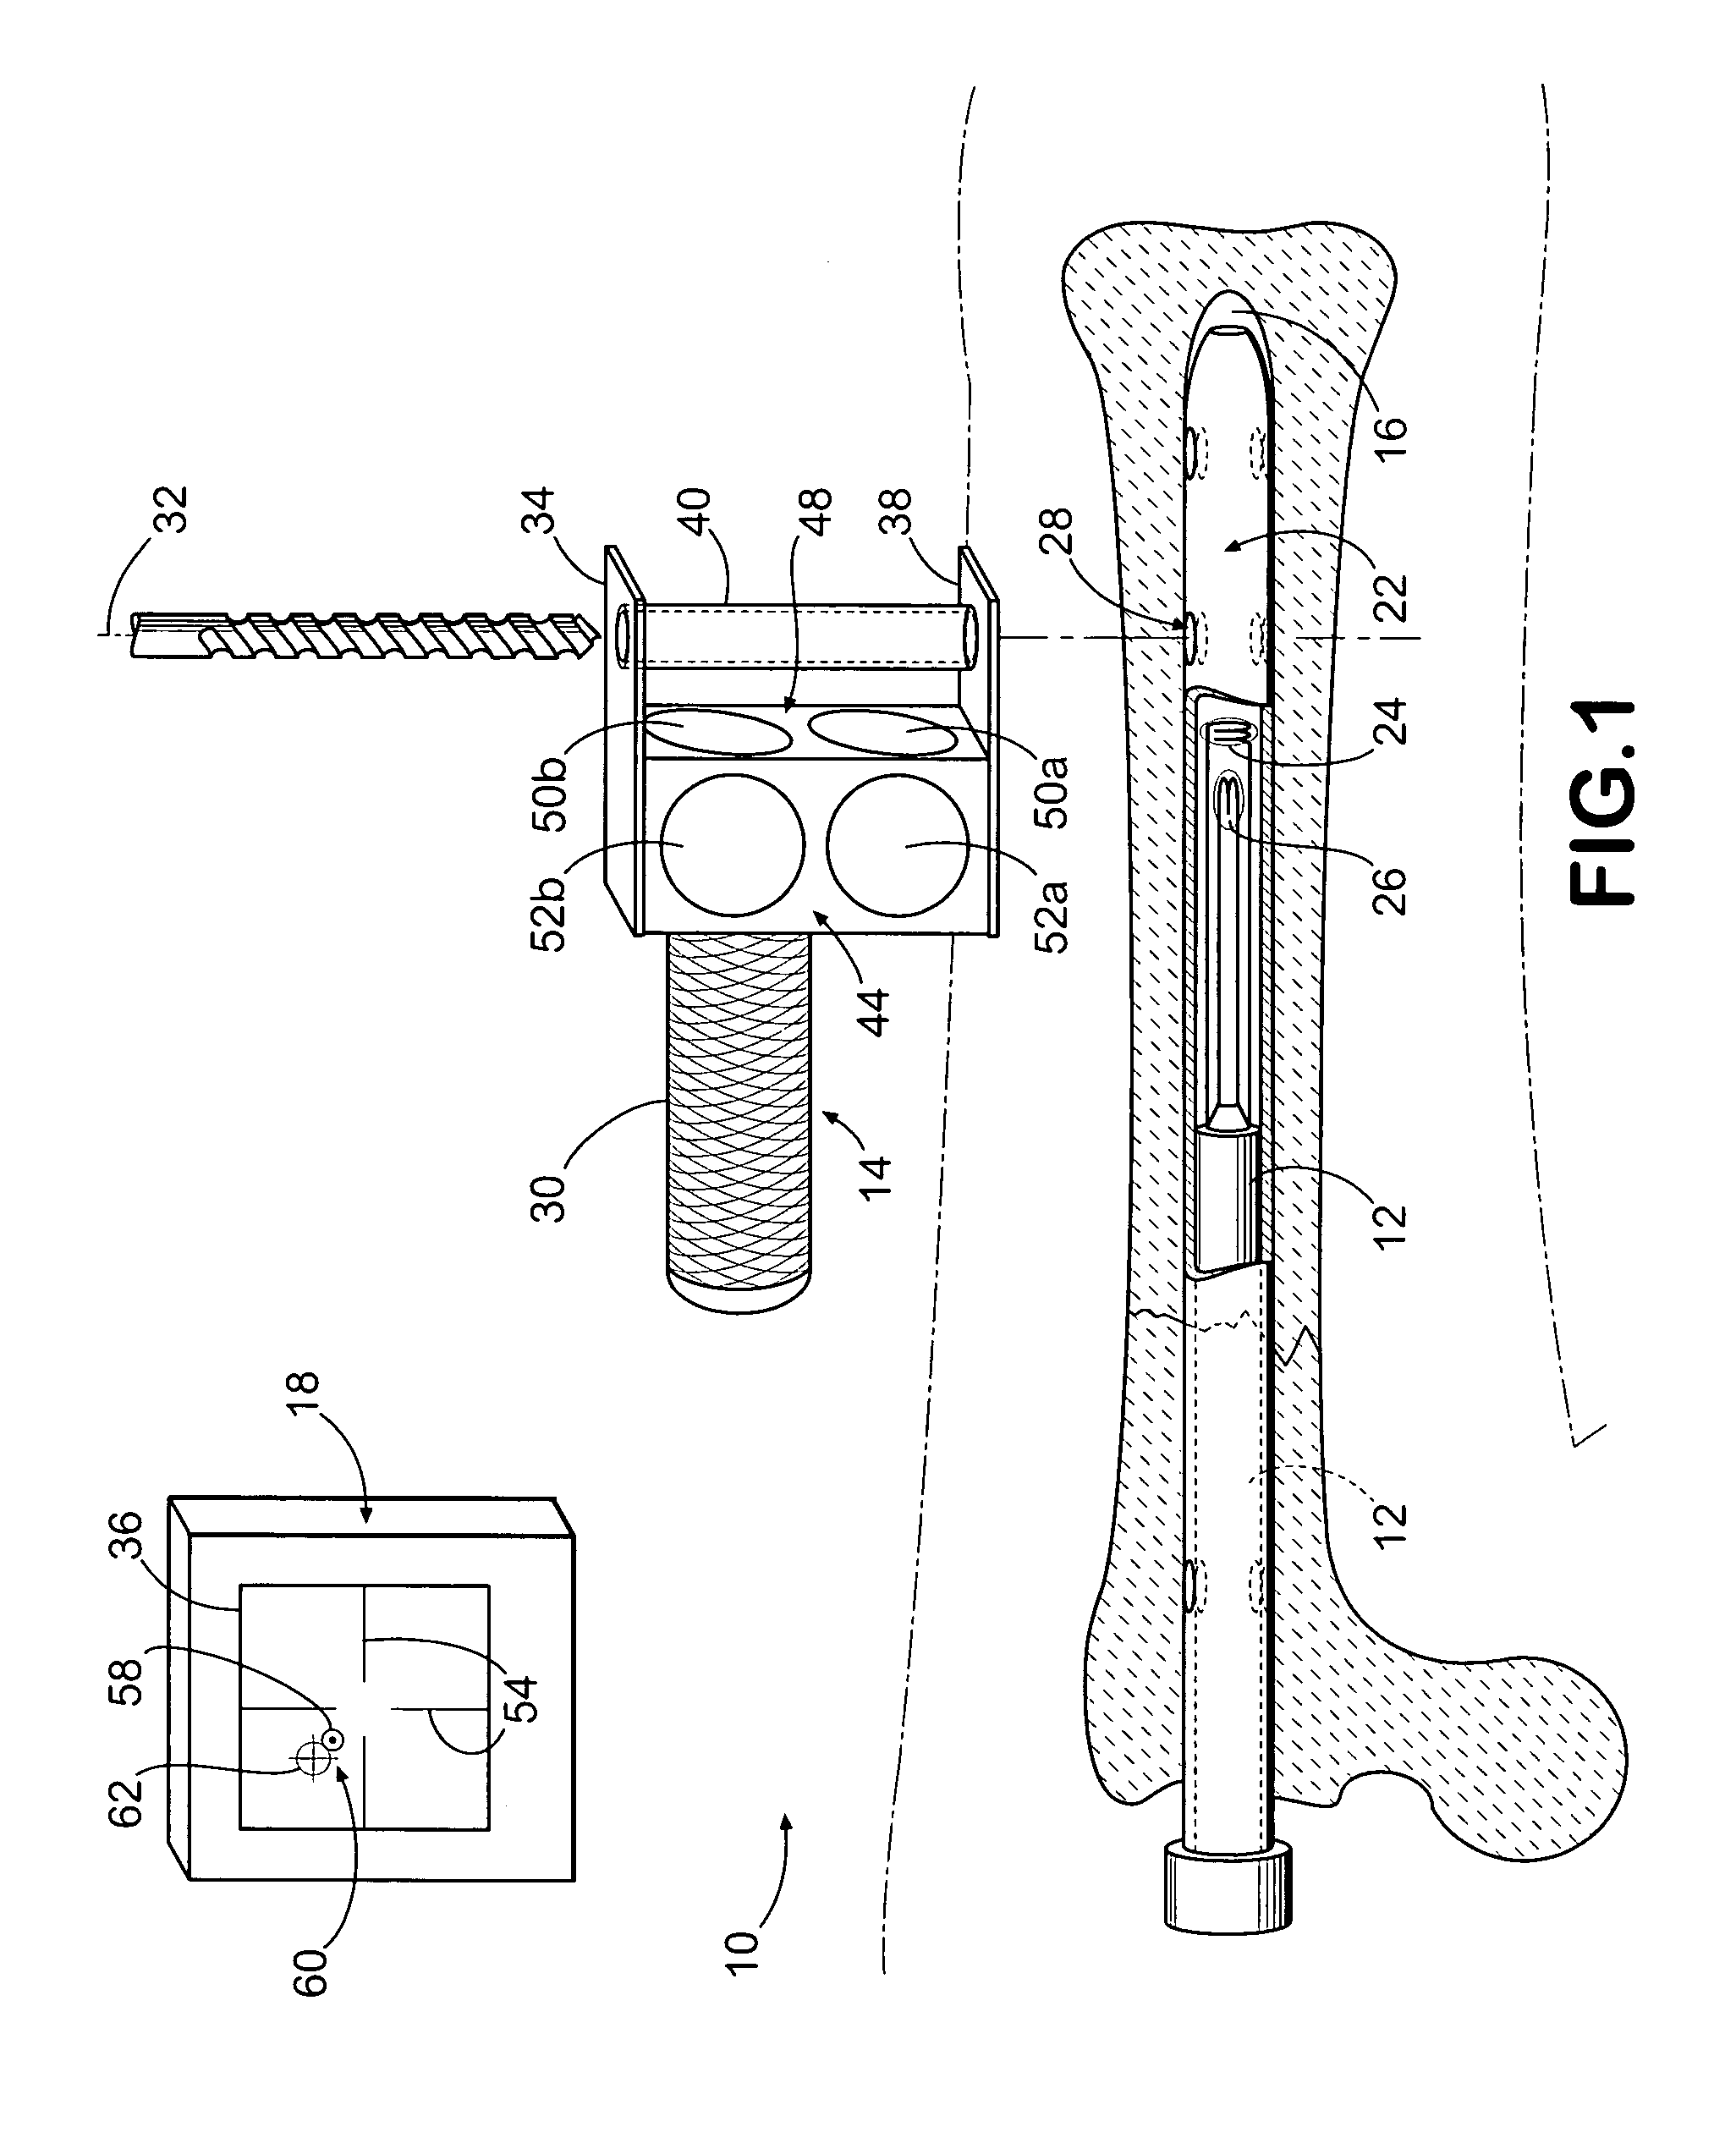 Method and apparatus for distal targeting of locking screws in intramedullary nails